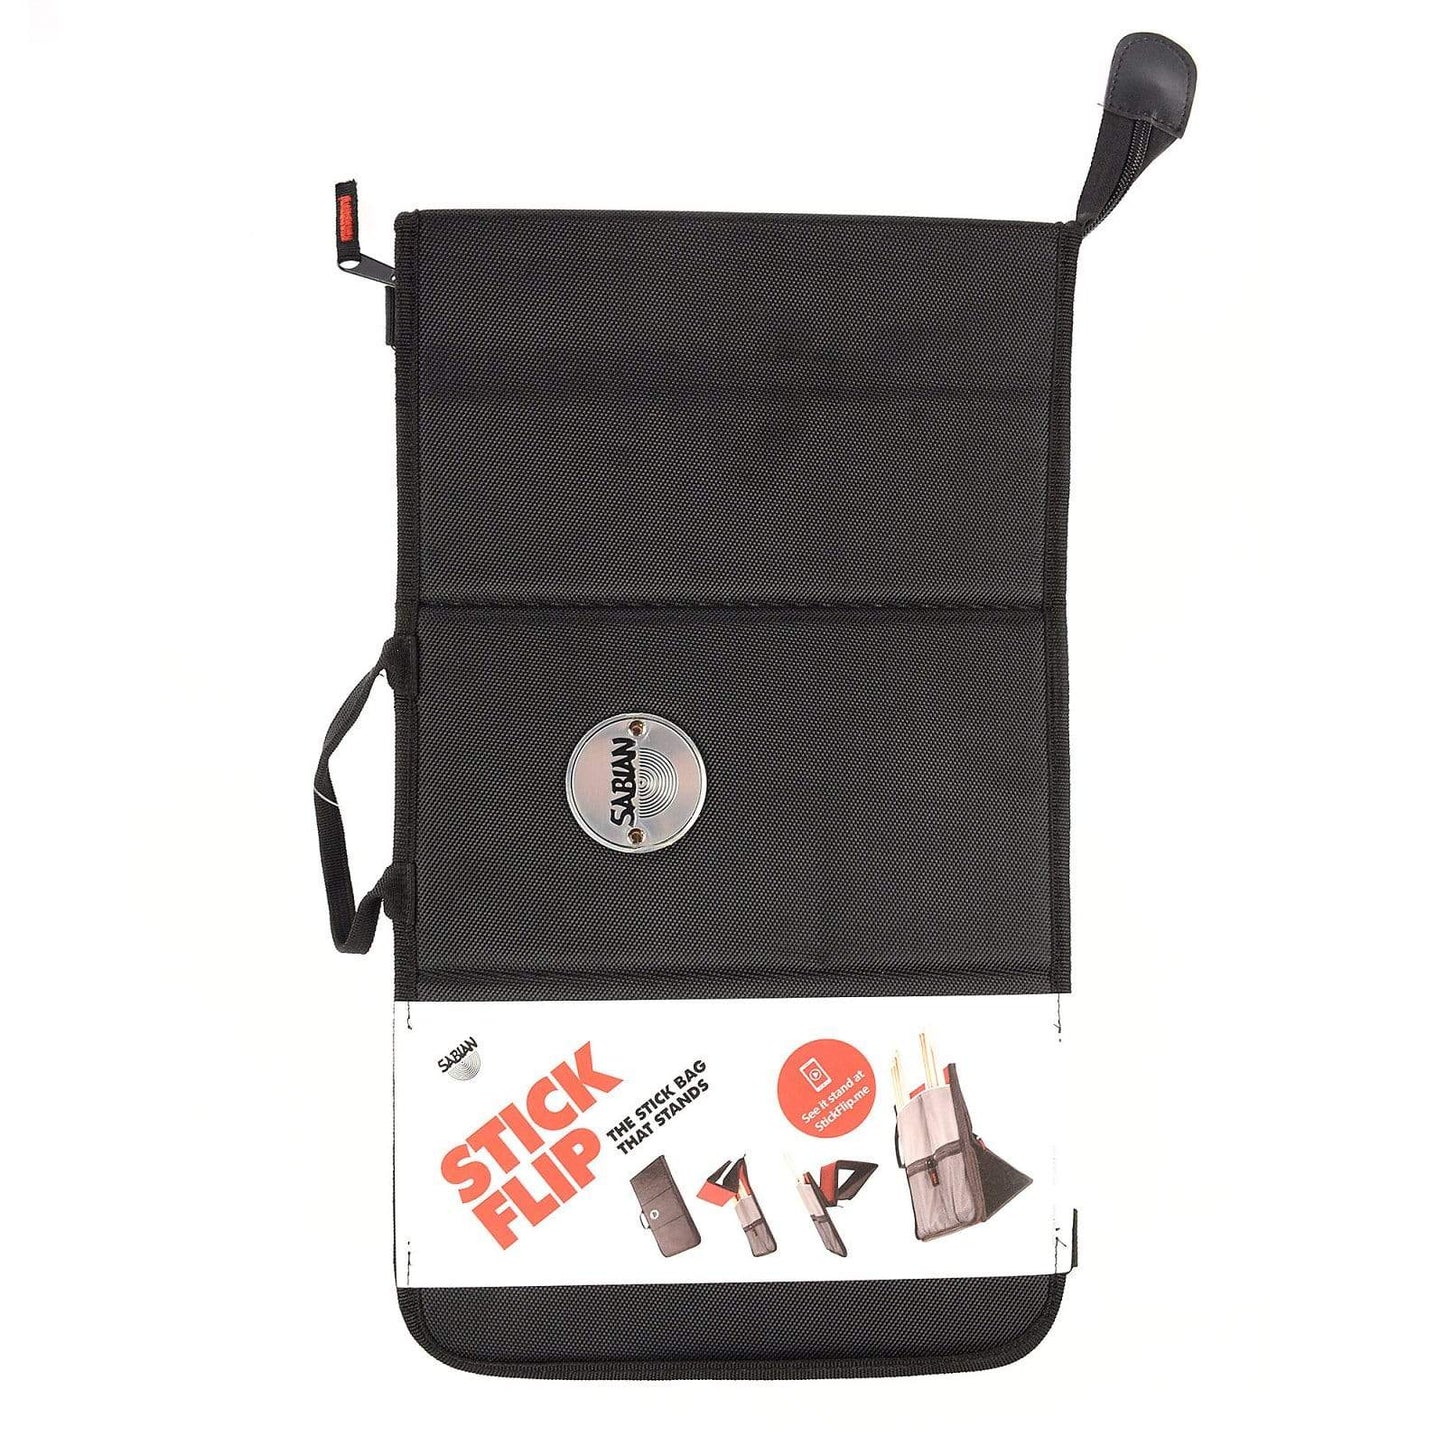 Sabian Stick Flip Stick Bag Black/Gray Drums and Percussion / Parts and Accessories / Cases and Bags